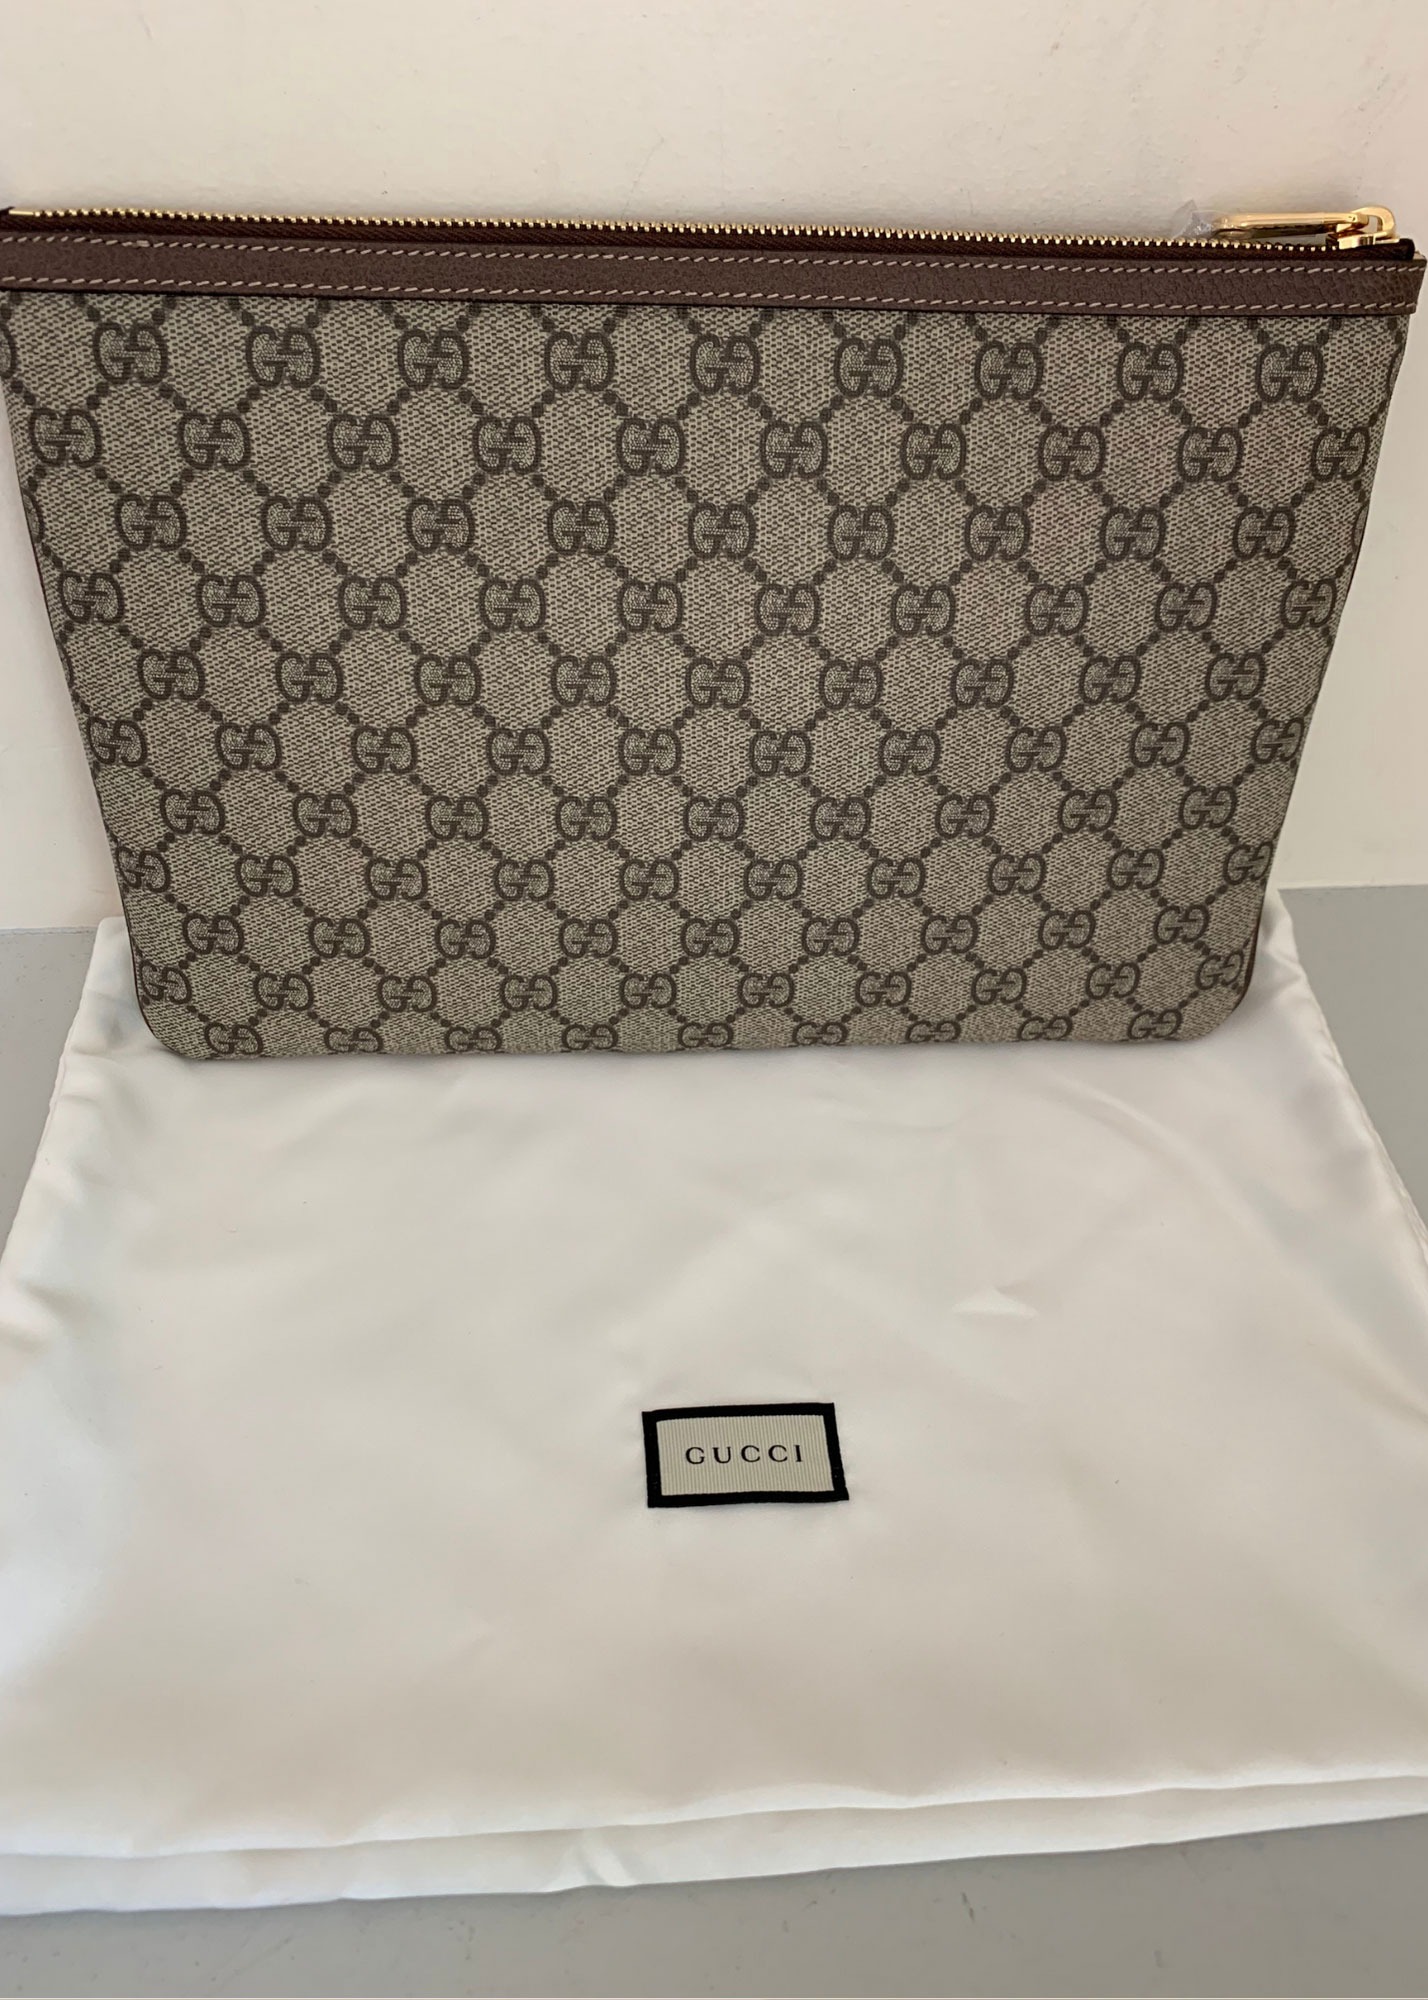 Gucci Ophidia Clutch Pouch Black Leather New